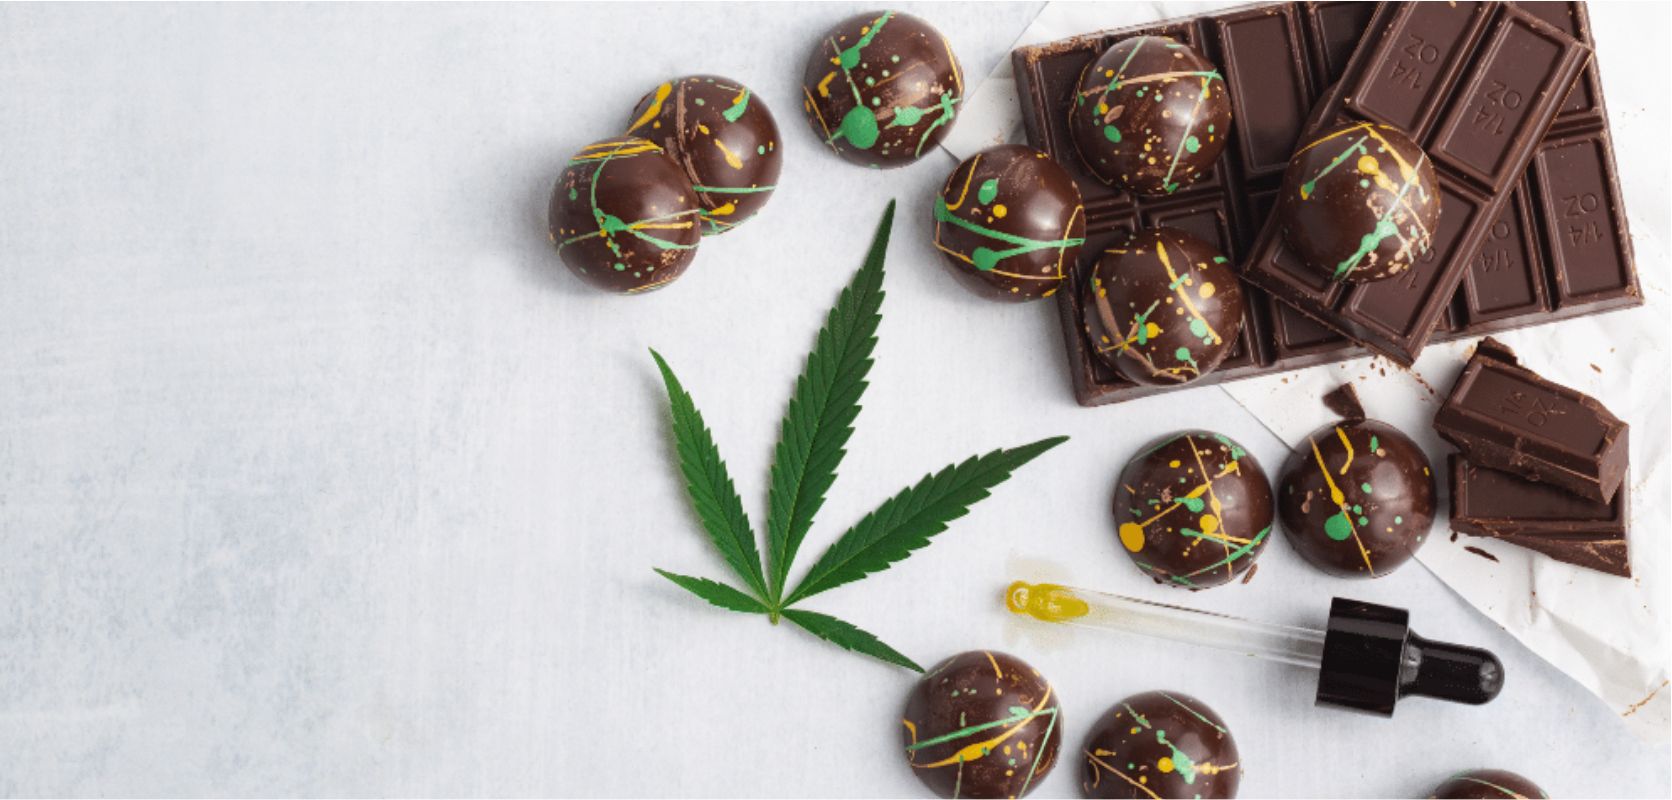 The Sativa edibles effects are known for being energizing and focus-sharpening, making them great for getting things done and staying productive.